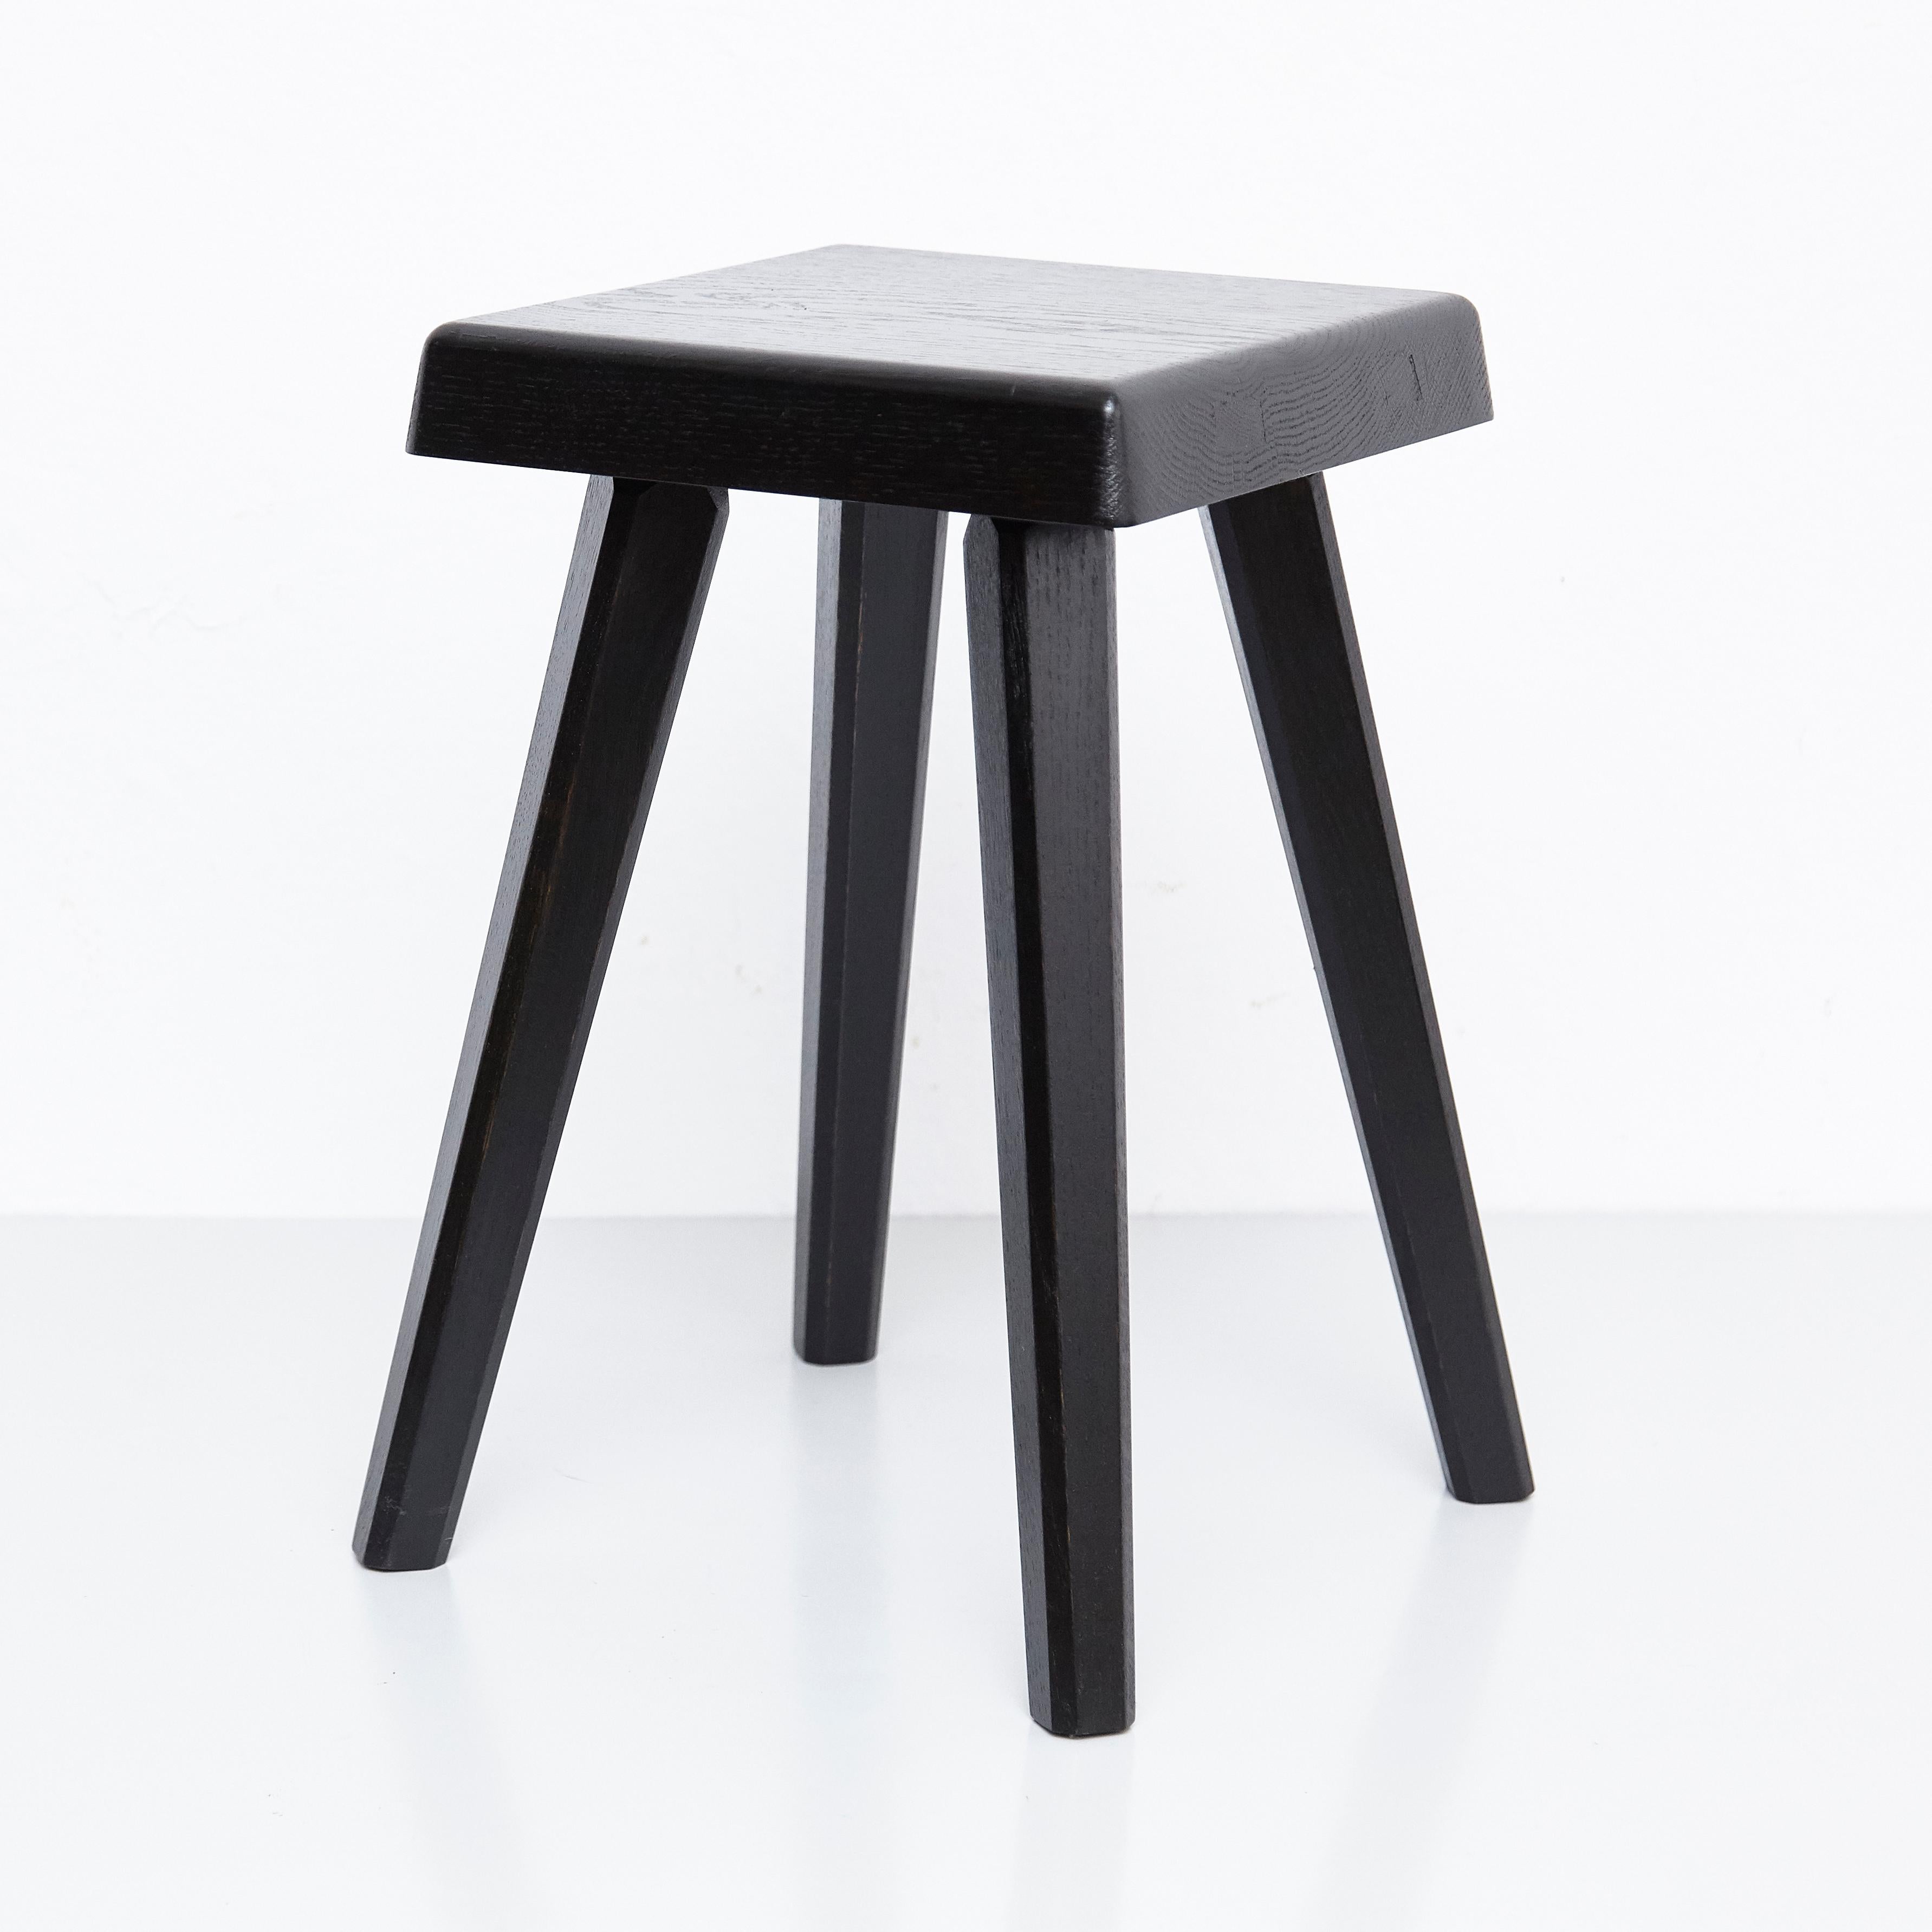 Special Black Edition stools designed by Pierre Chapo, manufactured in France, 1960s.
Manufactured by Chapo creations in 2019

Solid oakwood.

Stamped

Small : 29 x 29 x 33 cm
Tall : 29 x 29 x 45 cm

In good original condition, with minor wear